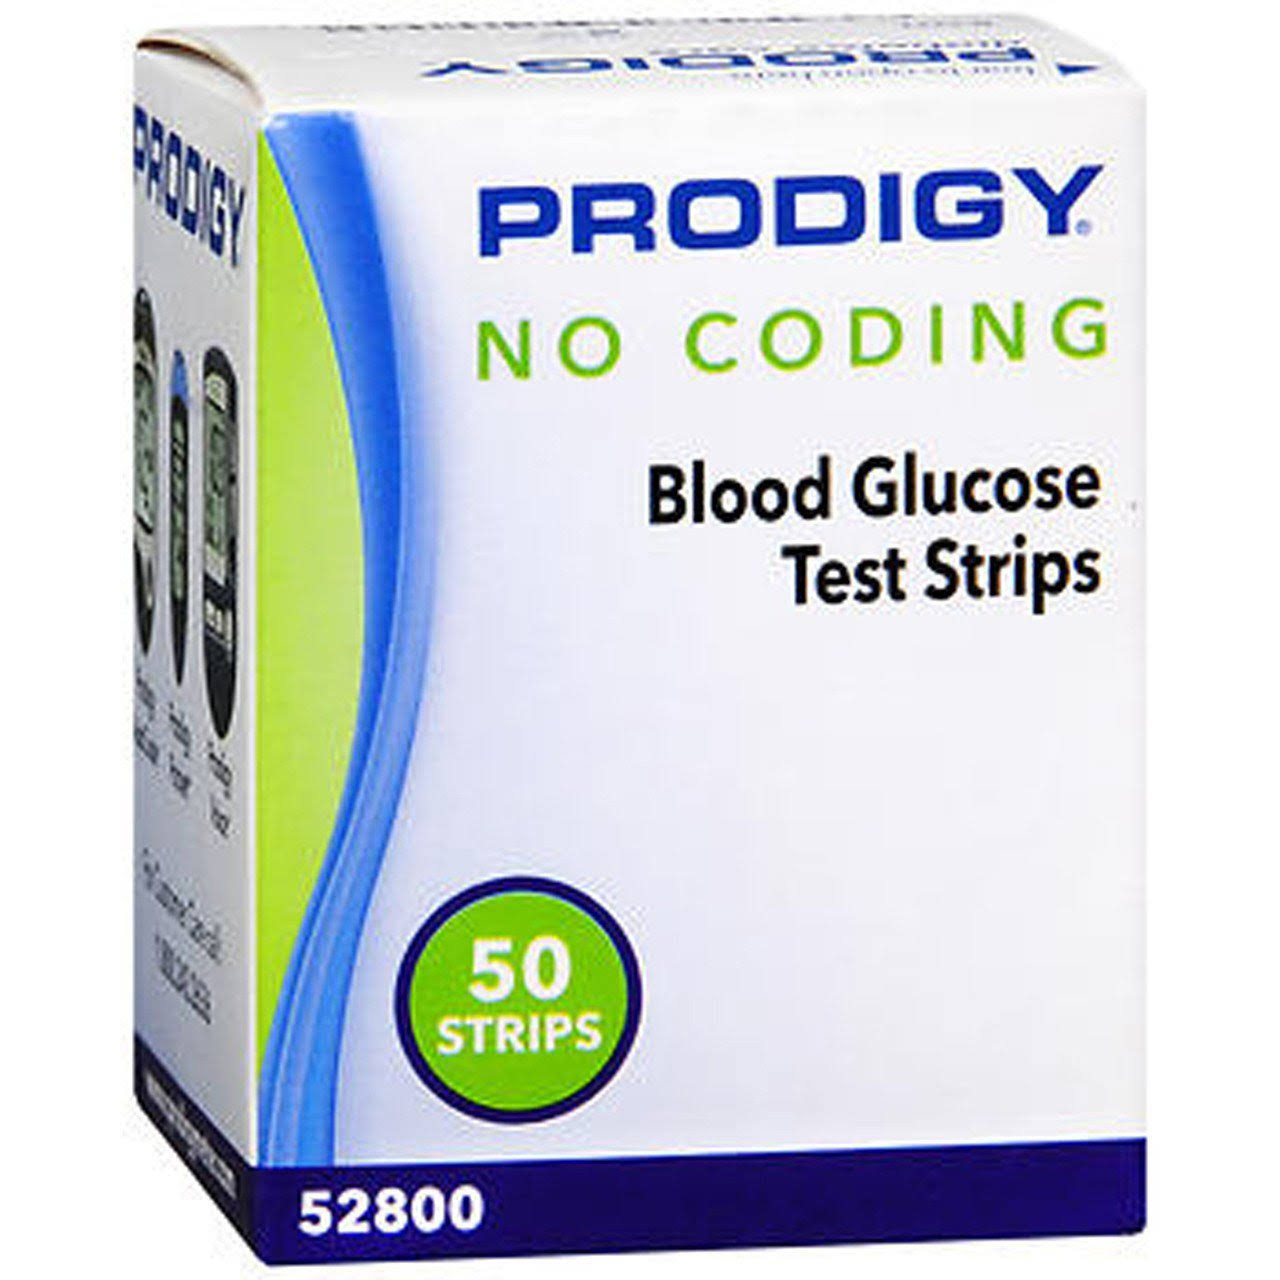 Prodigy No Coding Blood Glucose Test Strips - 300 Count